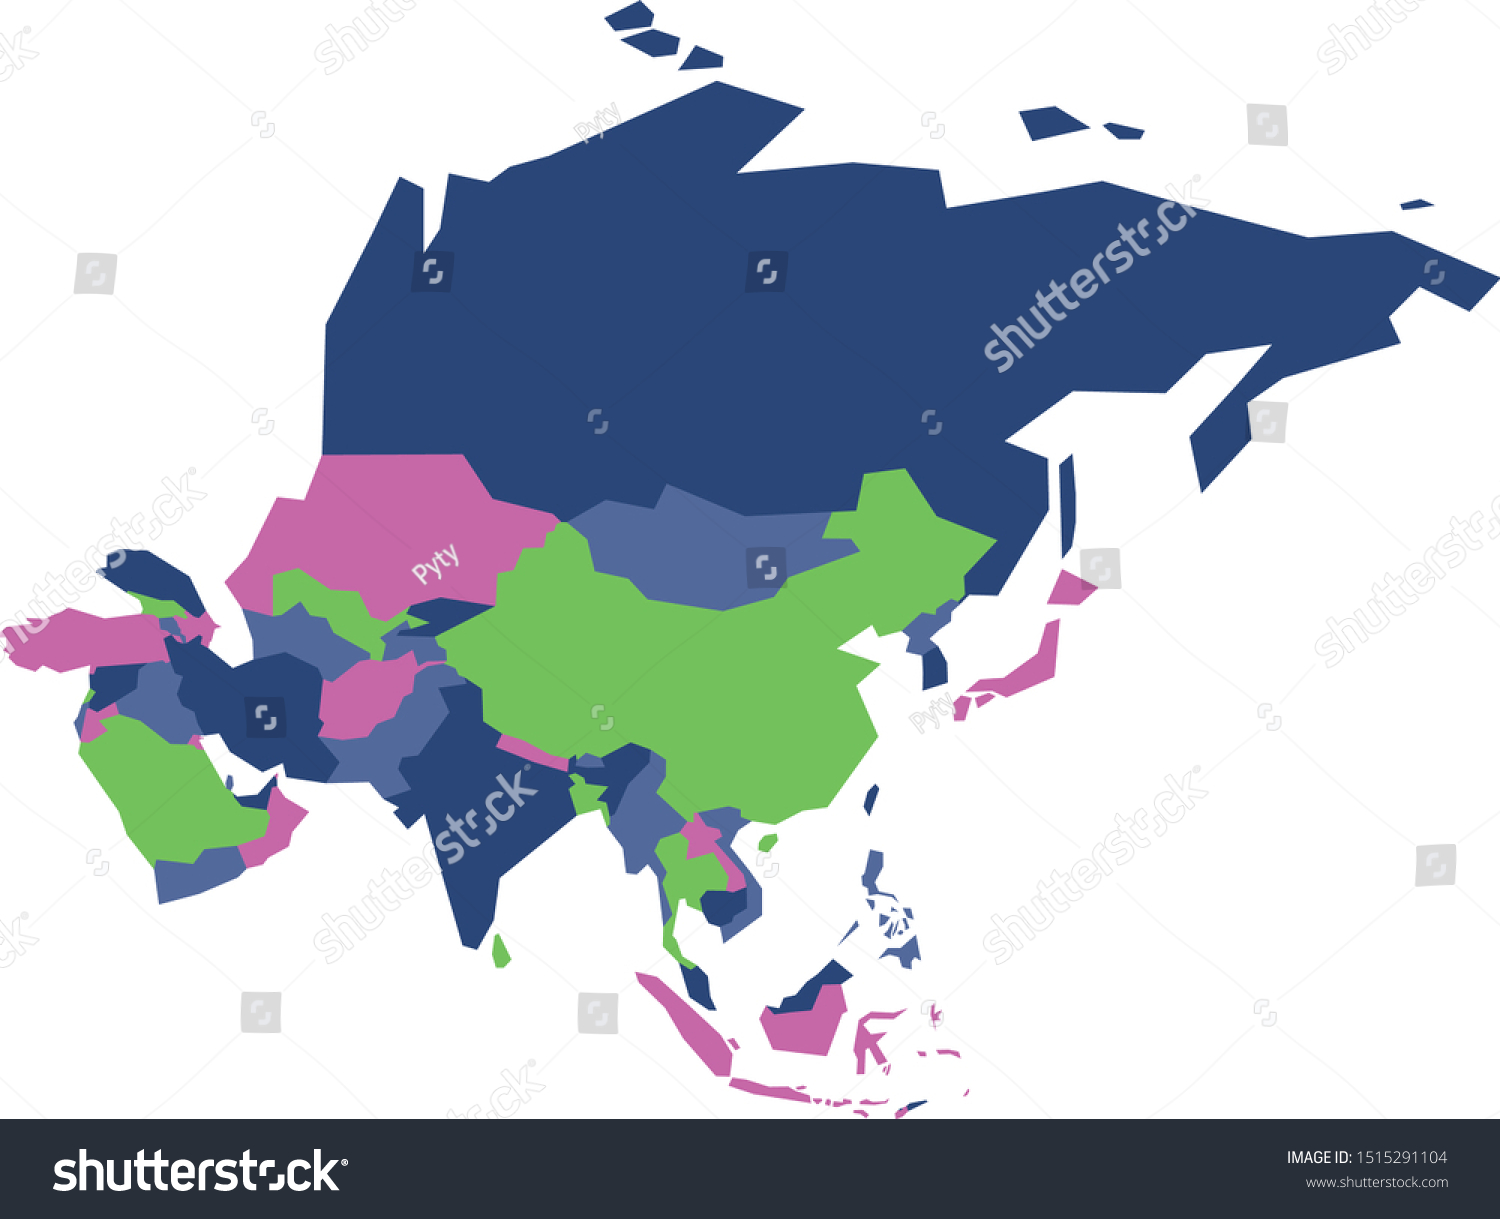 Very Simplified Infographical Political Map Asia Stock Vector Royalty Free 1515291104 4304